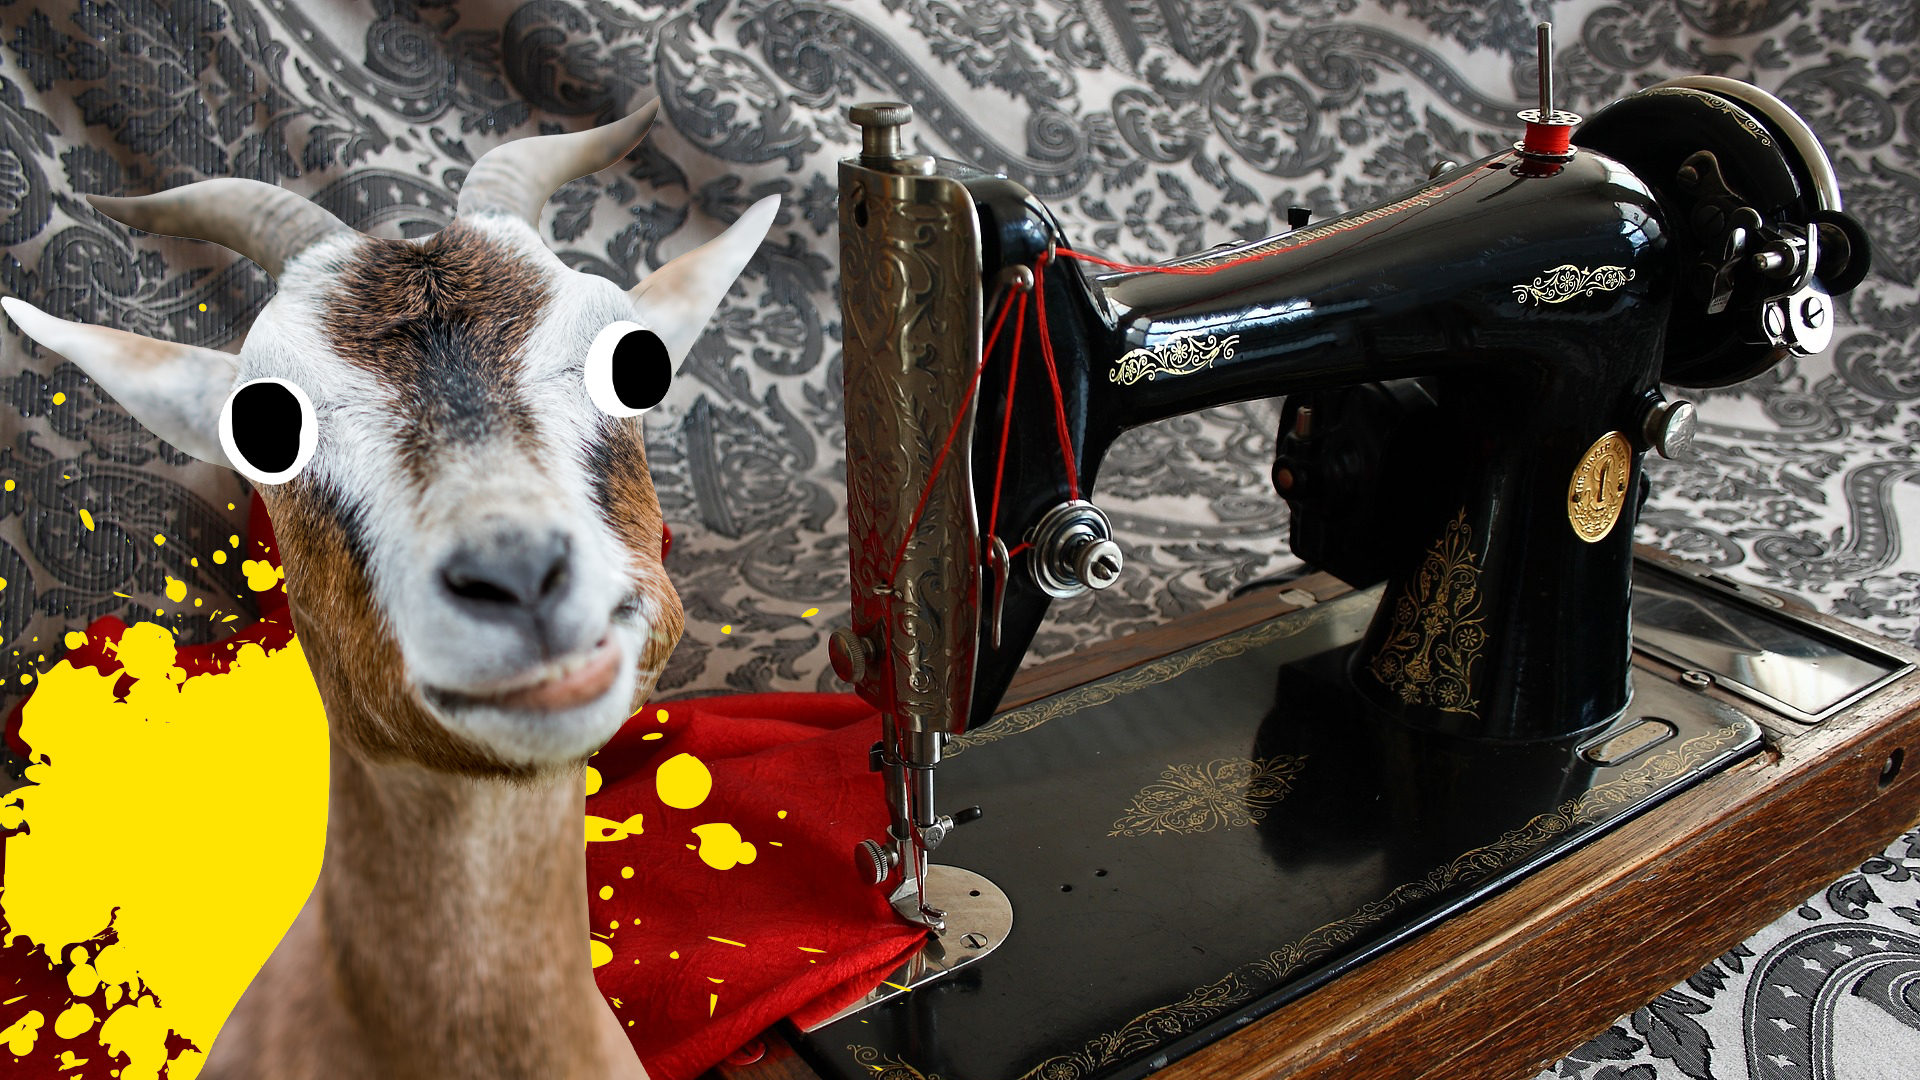 A goat and a sewing machine